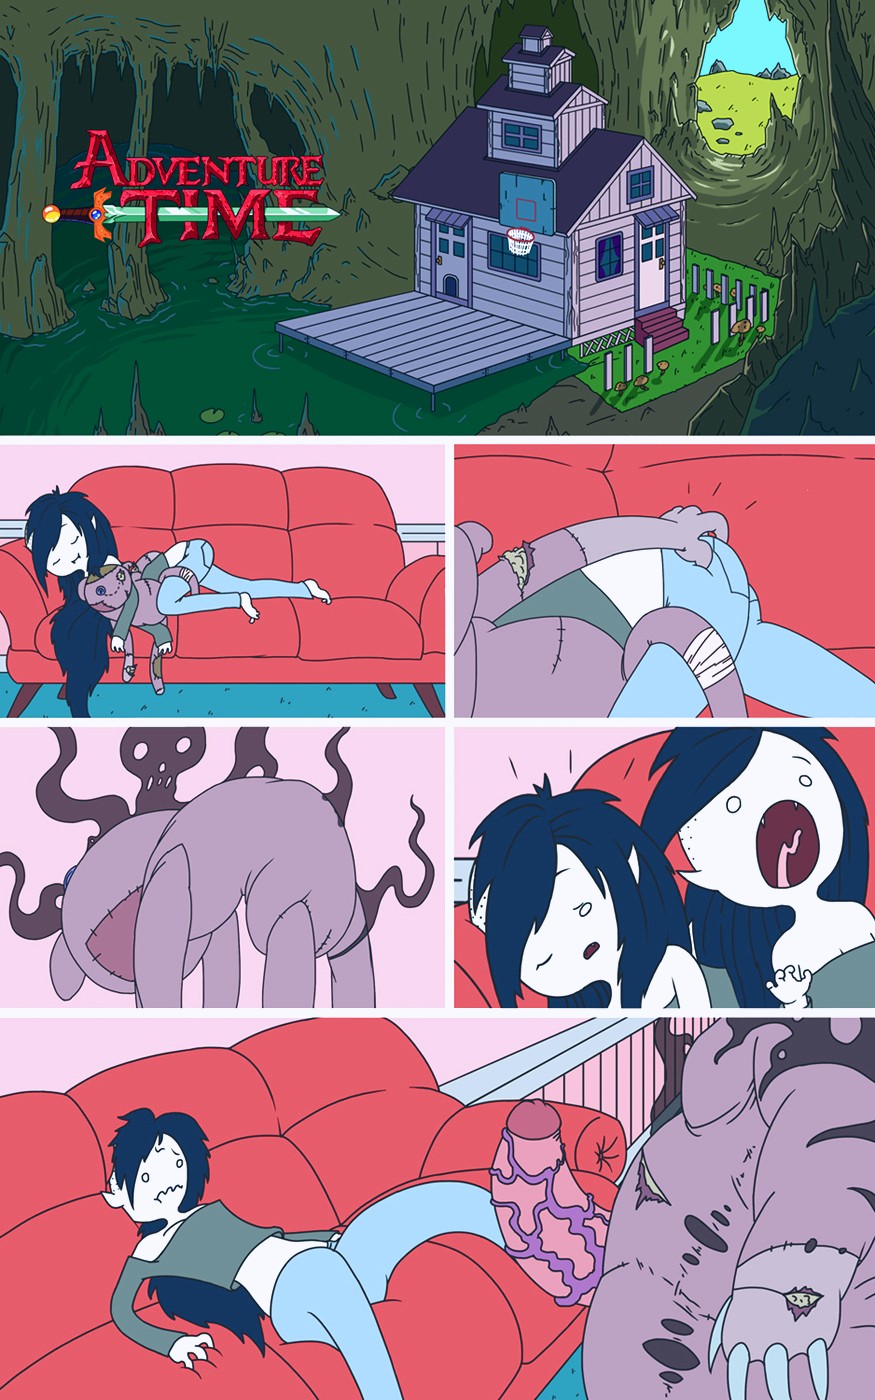 Rape Time porn comic page 01 on category Adventure Time